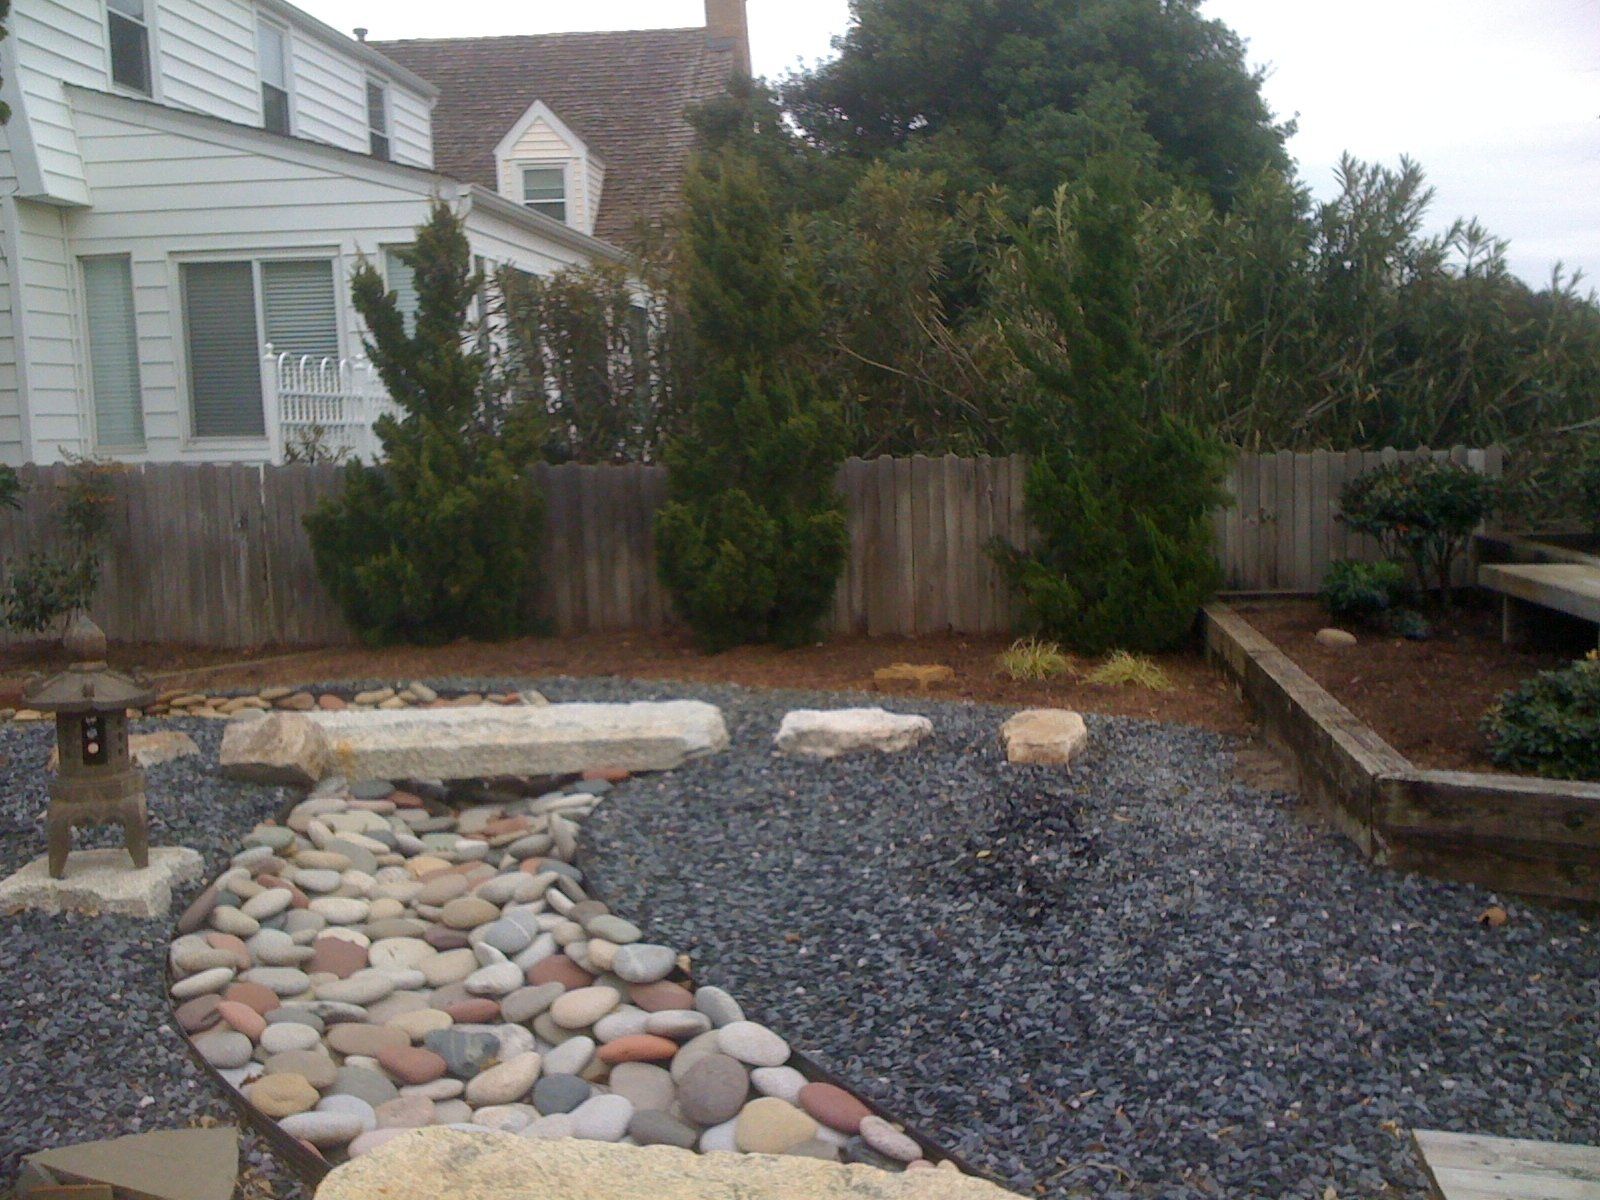 Davidscell Garden Island and Step stones - Lawn, Tree & Landscaping in Chesapeake, VA